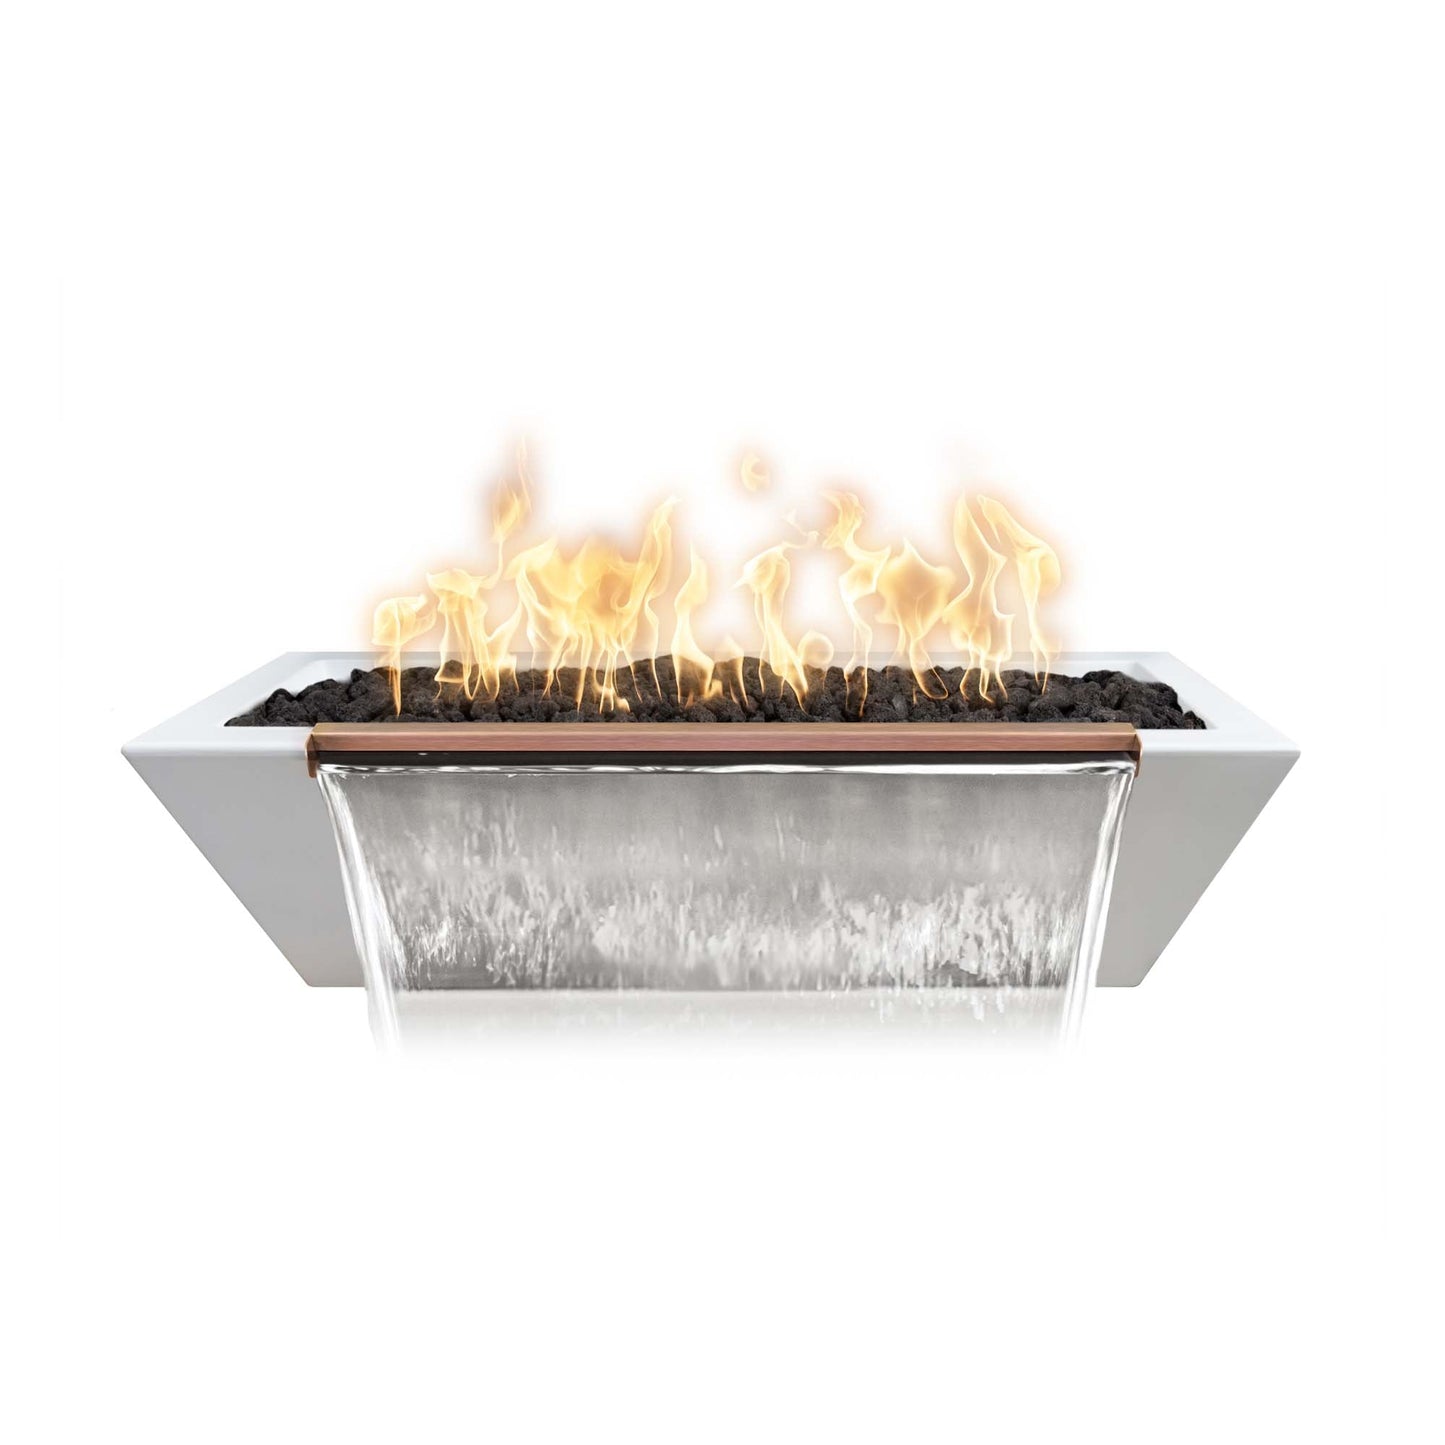 The Outdoor Plus Linear Maya 72" Rustic Moss Stone GFRC Concrete Natural Gas Fire & Water Bowl with Match Lit Ignition